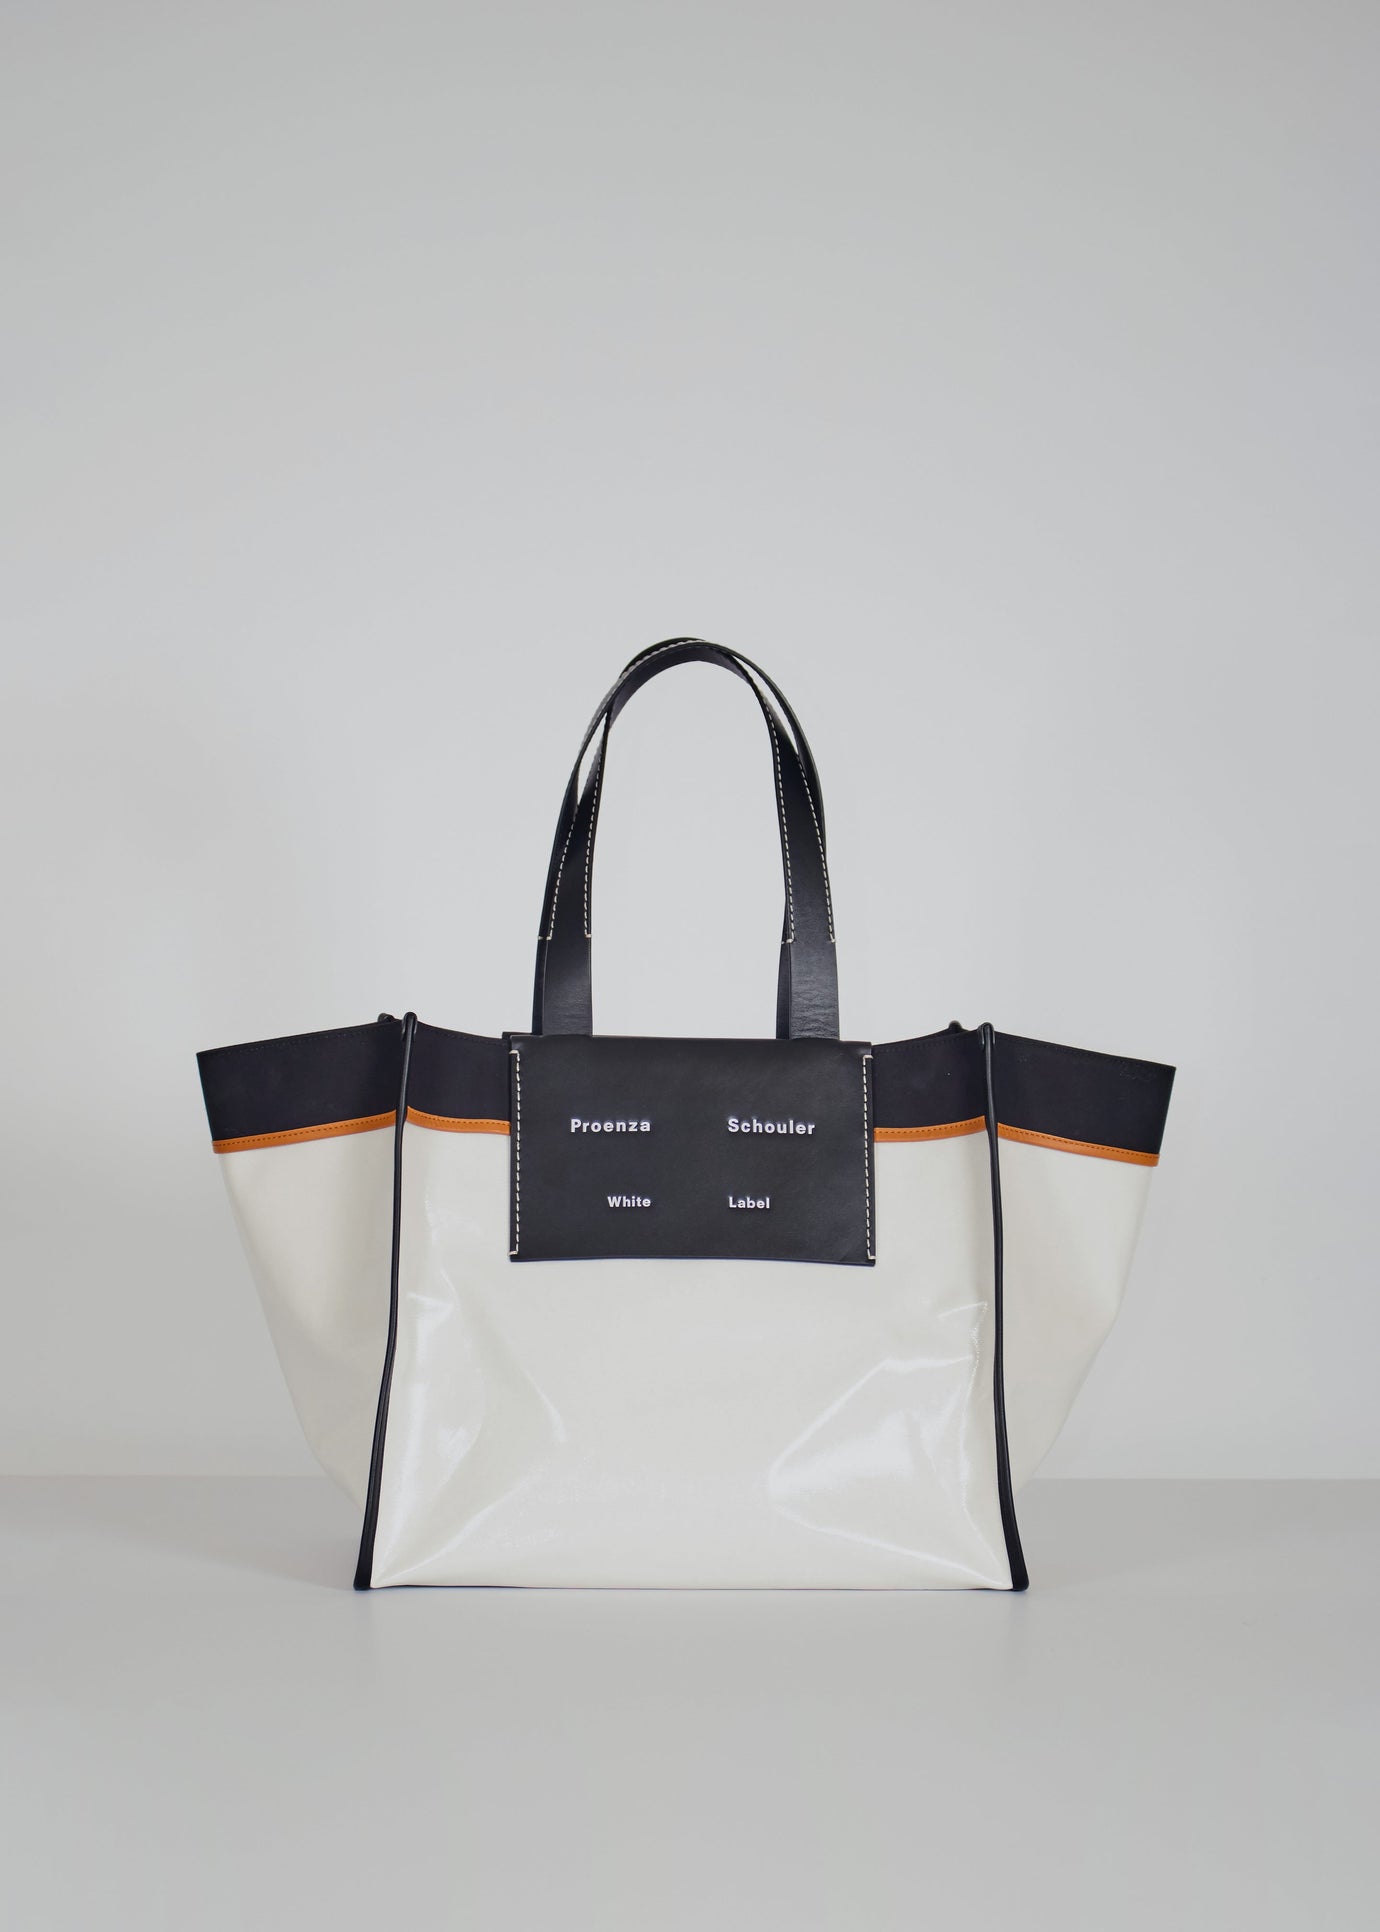 Proenza Schouler White Label XL Morris Coated Canvas Tote - Off White